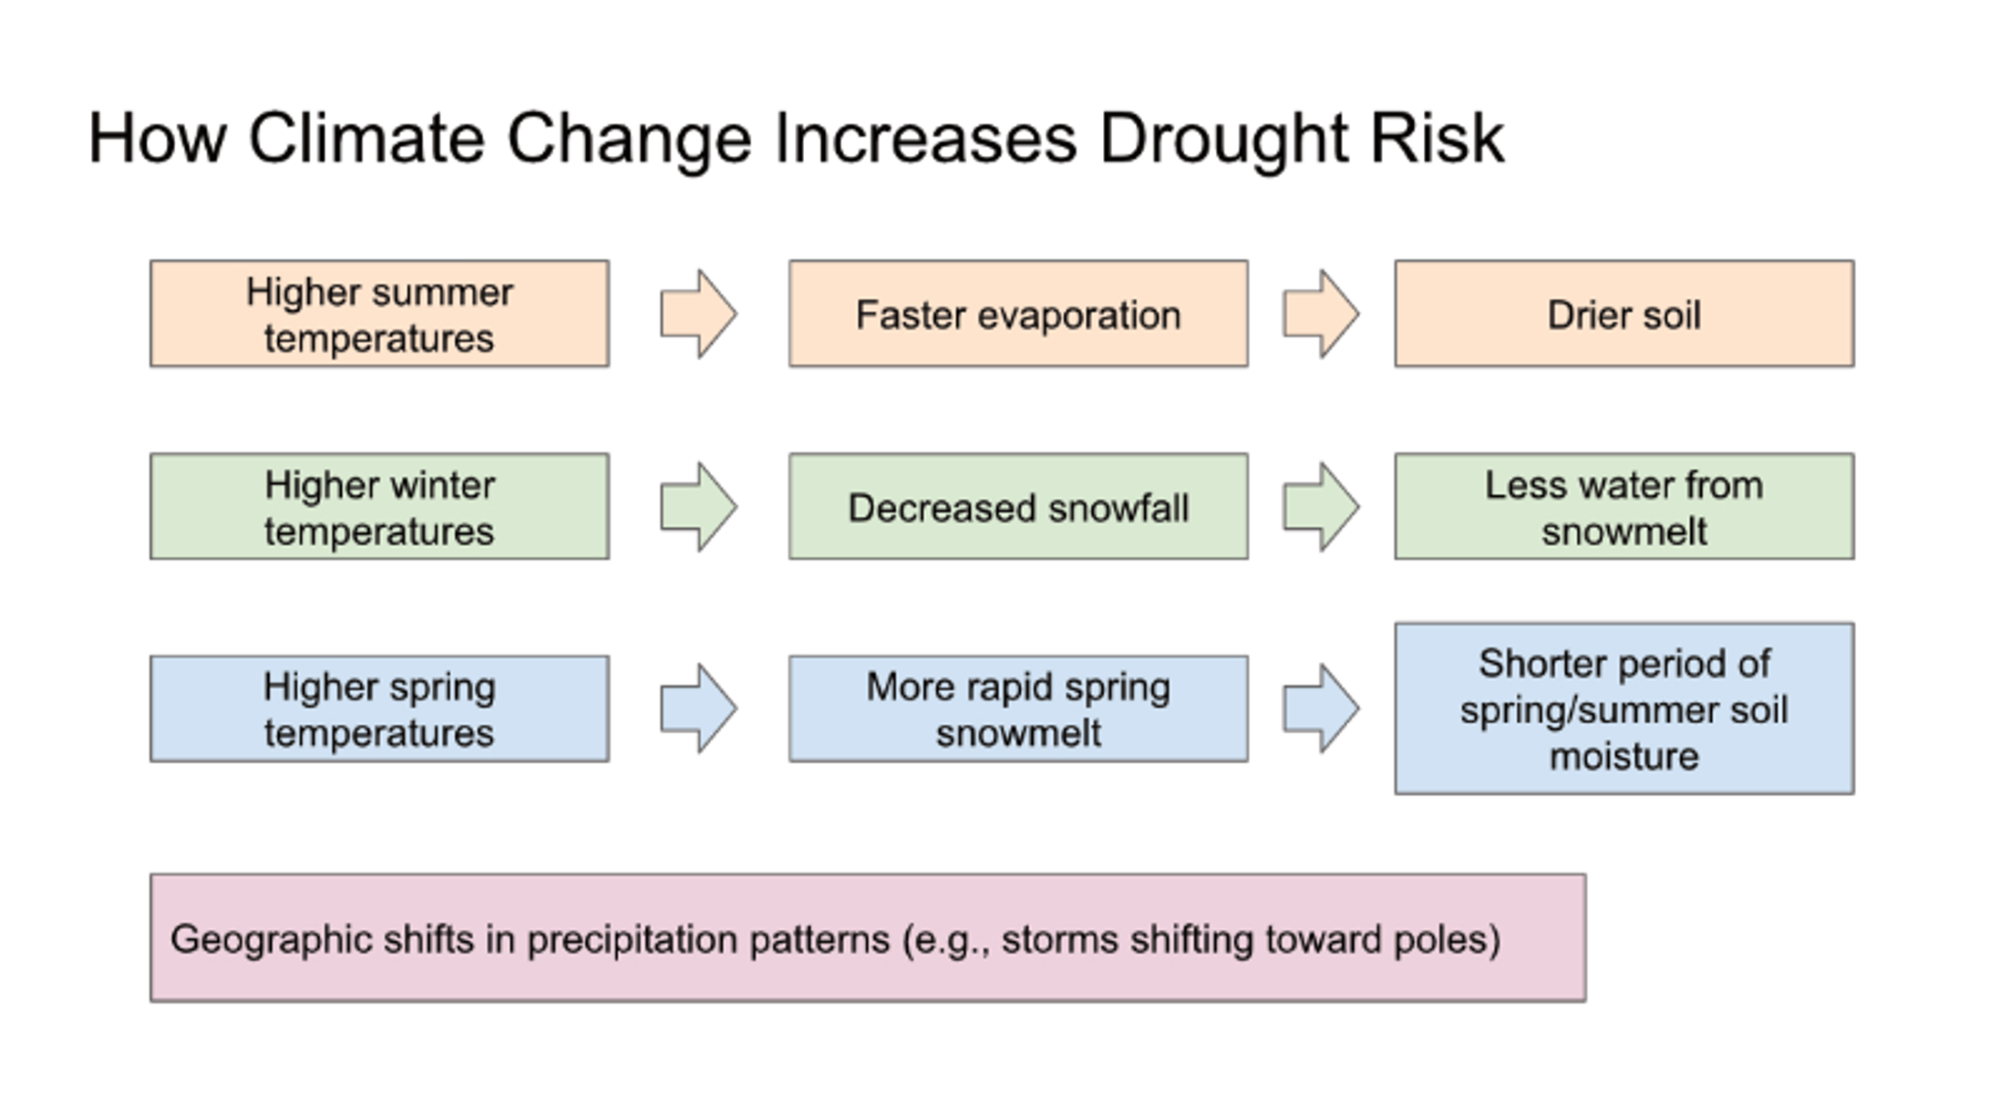 A diagram showing how higher seasonal temperatures and changing precipitation patterns can increase drought risk.